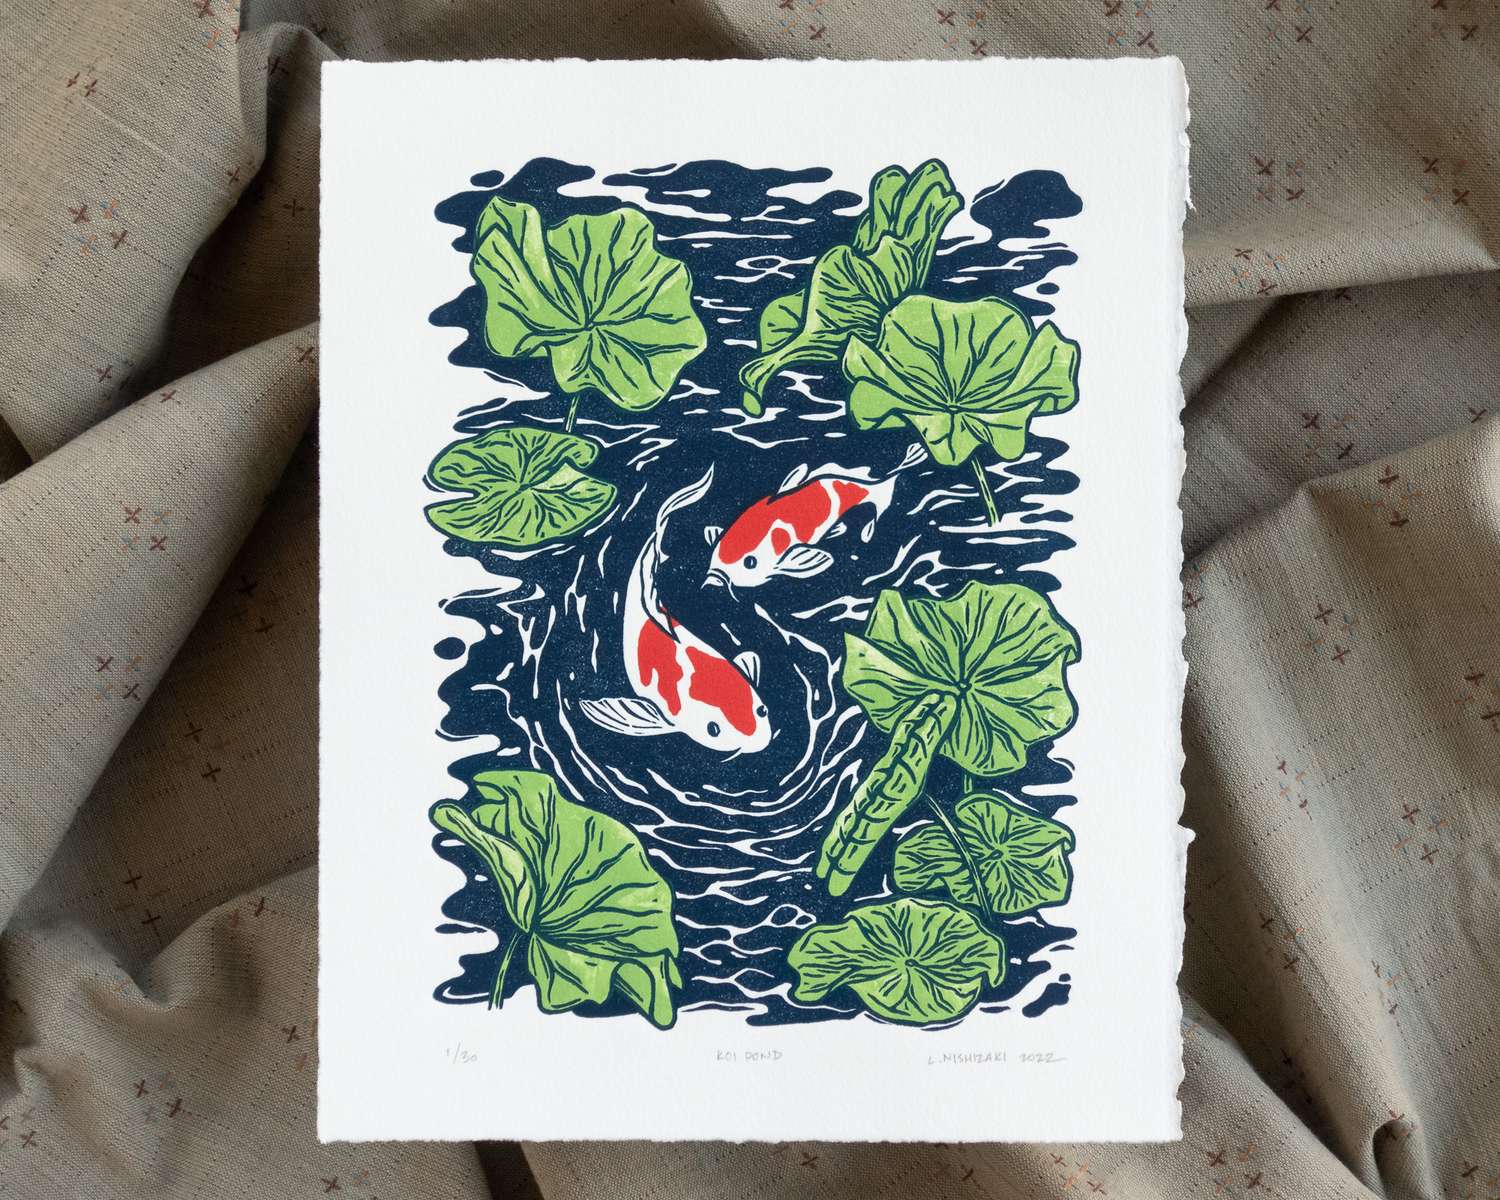 A white vertical rectangular paper depicting two red and white koi swimming below the rippled surface of a pond, with many green lily pads growing out of the water. The print sits on top of a rumpled grey fabric backdrop.